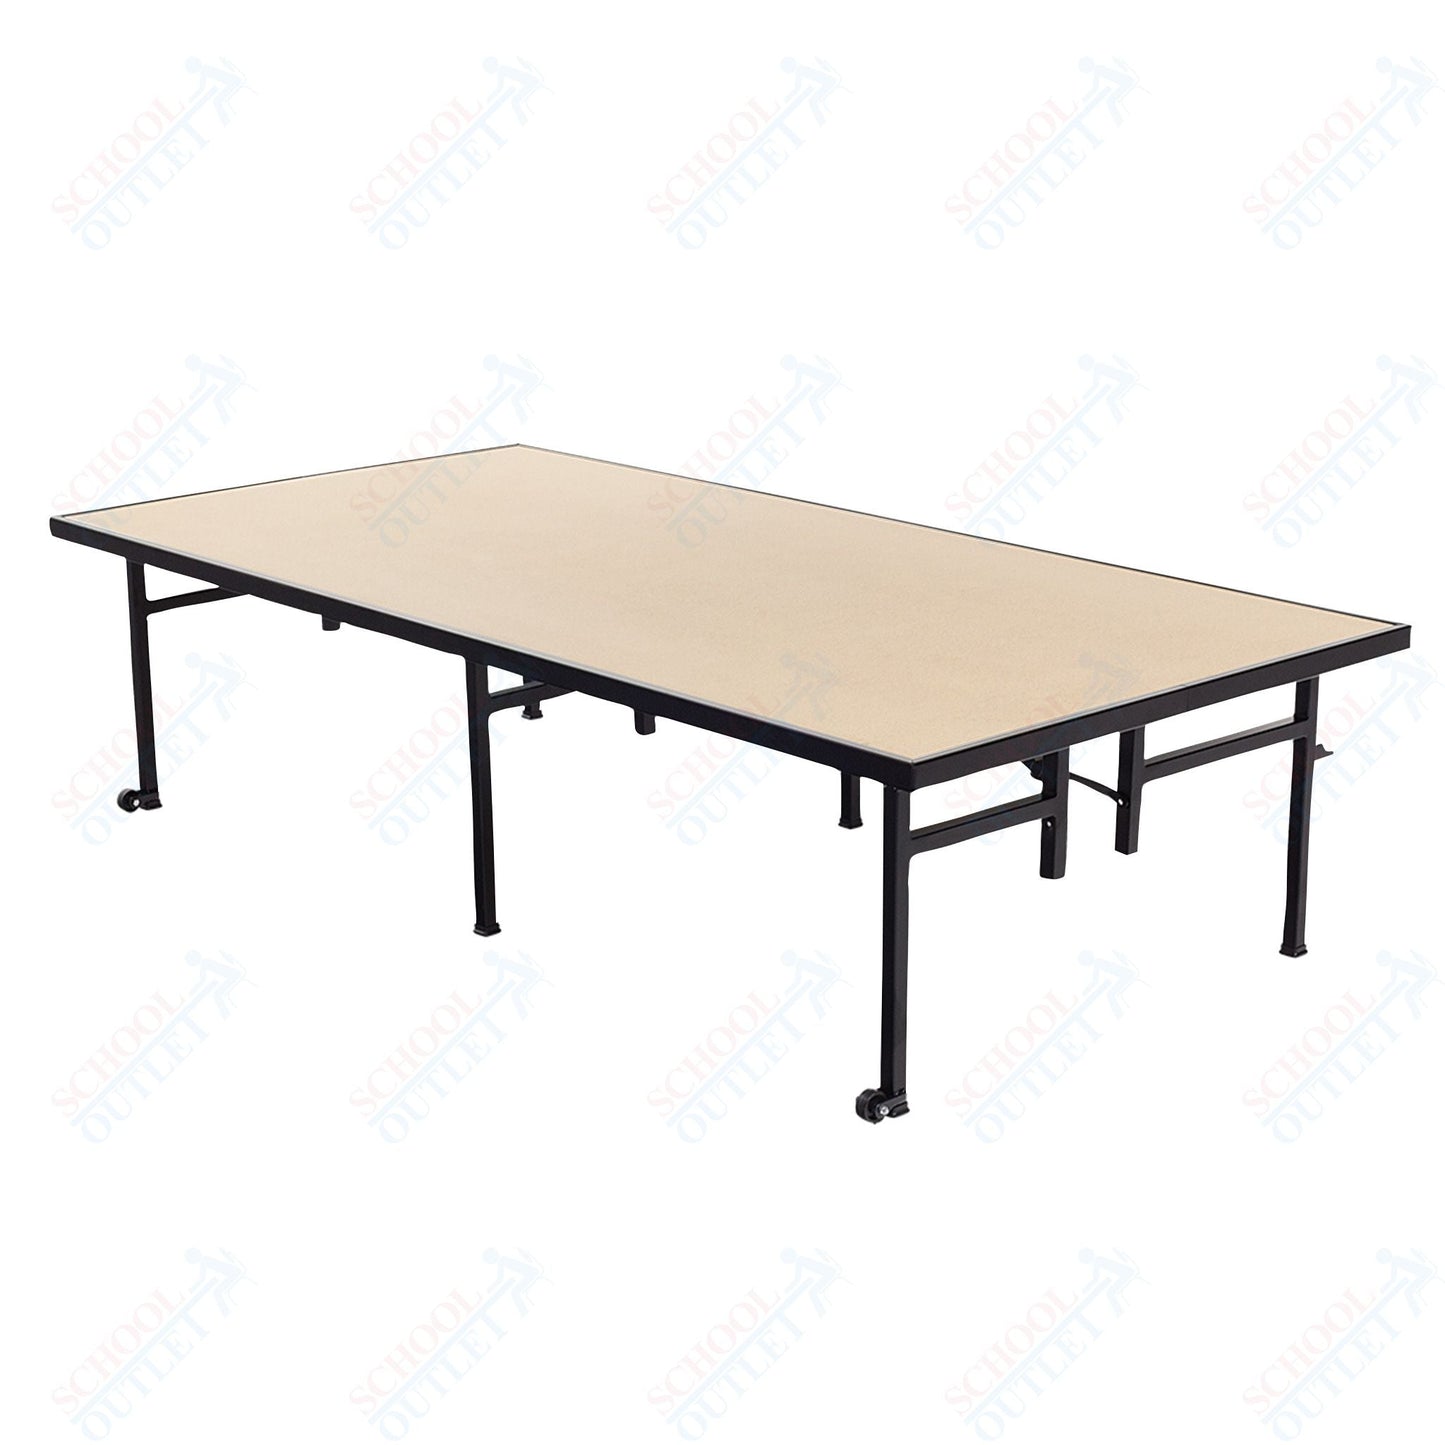 AmTab Fixed Height Stage - Hardboard Top - 48"W x 72"L x 24"H (AmTab AMT - ST4624H) - SchoolOutlet